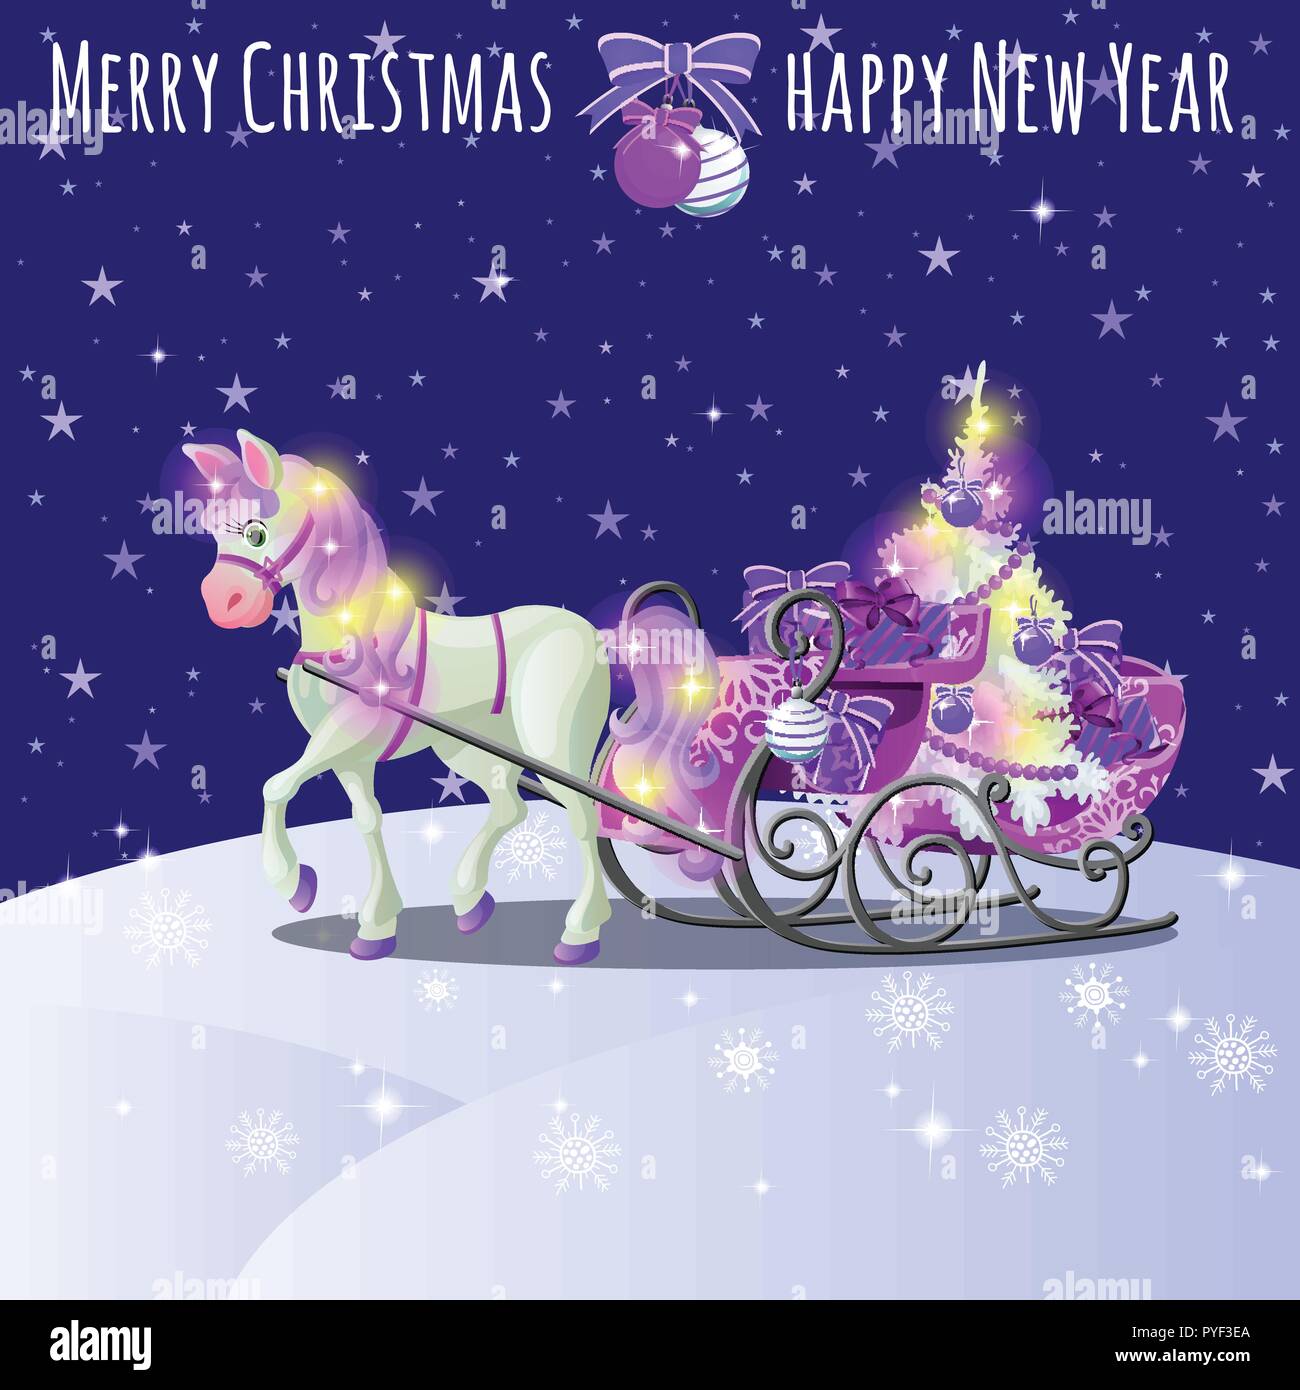 Christmas sketch with animated horse with a pink mane and hooves ...